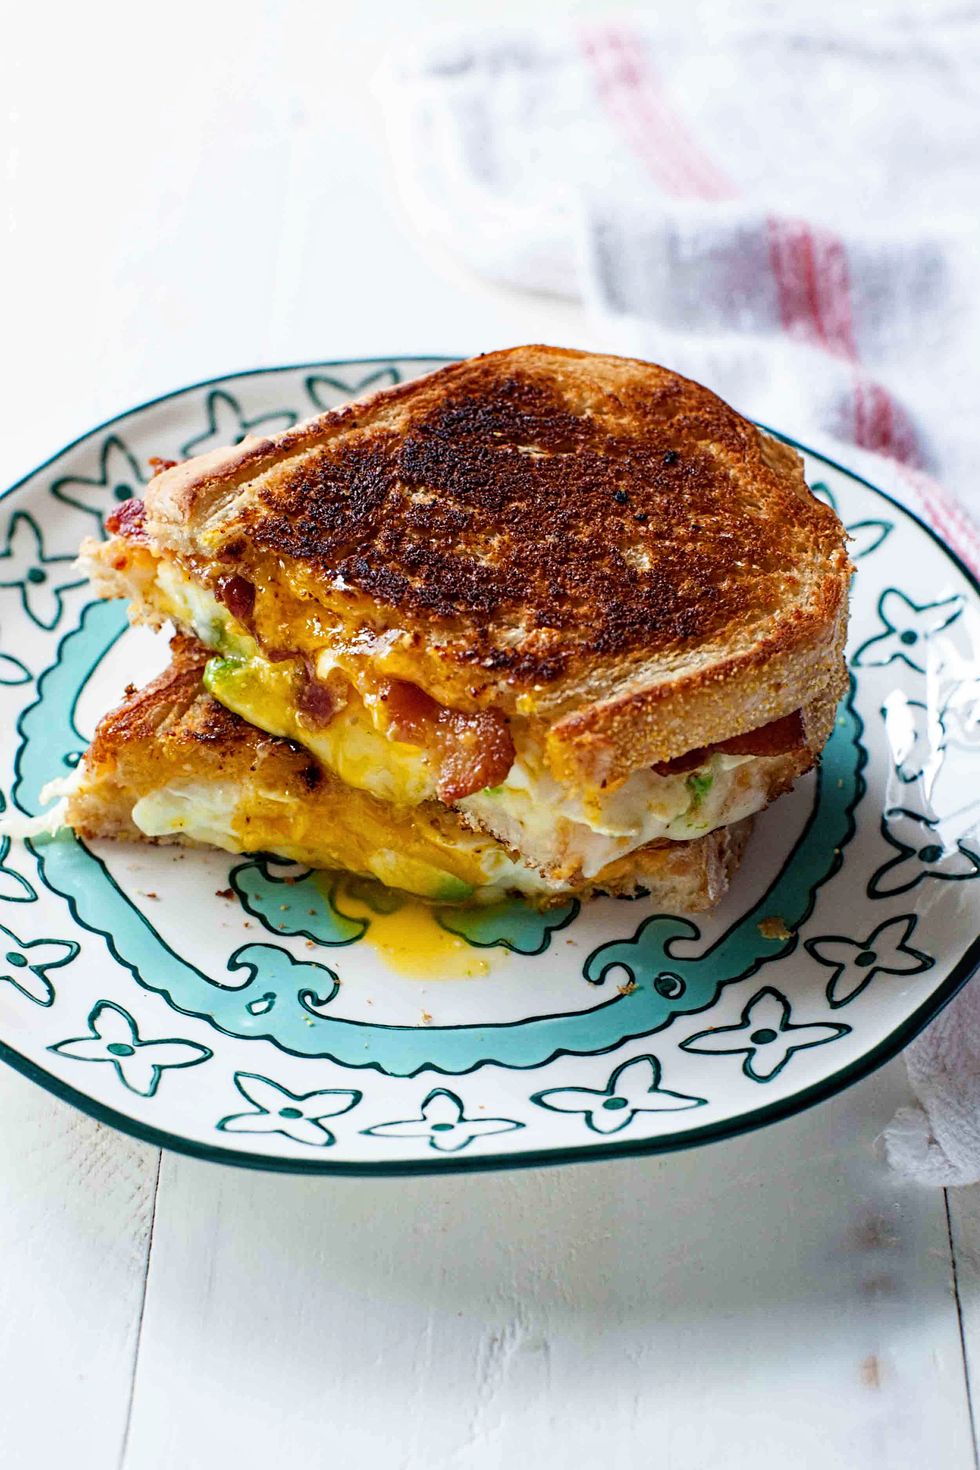 https://hips.hearstapps.com/thepioneerwoman/wp-content/uploads/2015/09/ultimate-grilled-cheese-14.jpg?resize=980:*